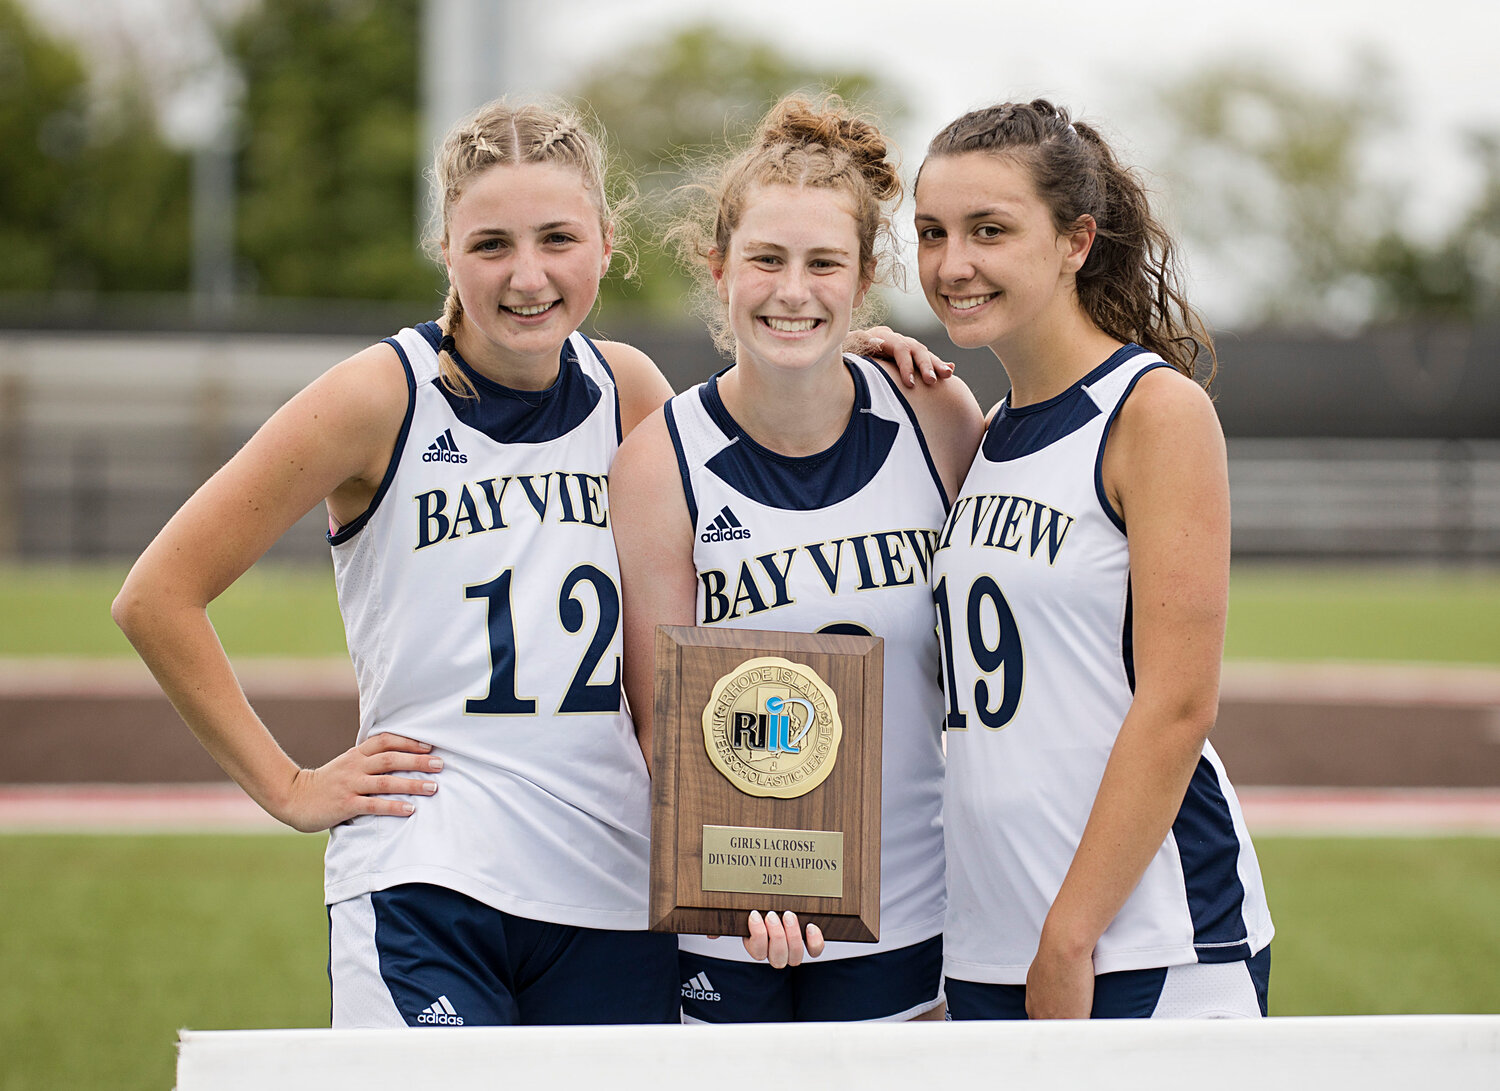 Bay View seniors Olivia Mattos, Elizabeth Healey and Dolan collect the title trophy after the Bengals defeated the Townies in quadruple overtime.